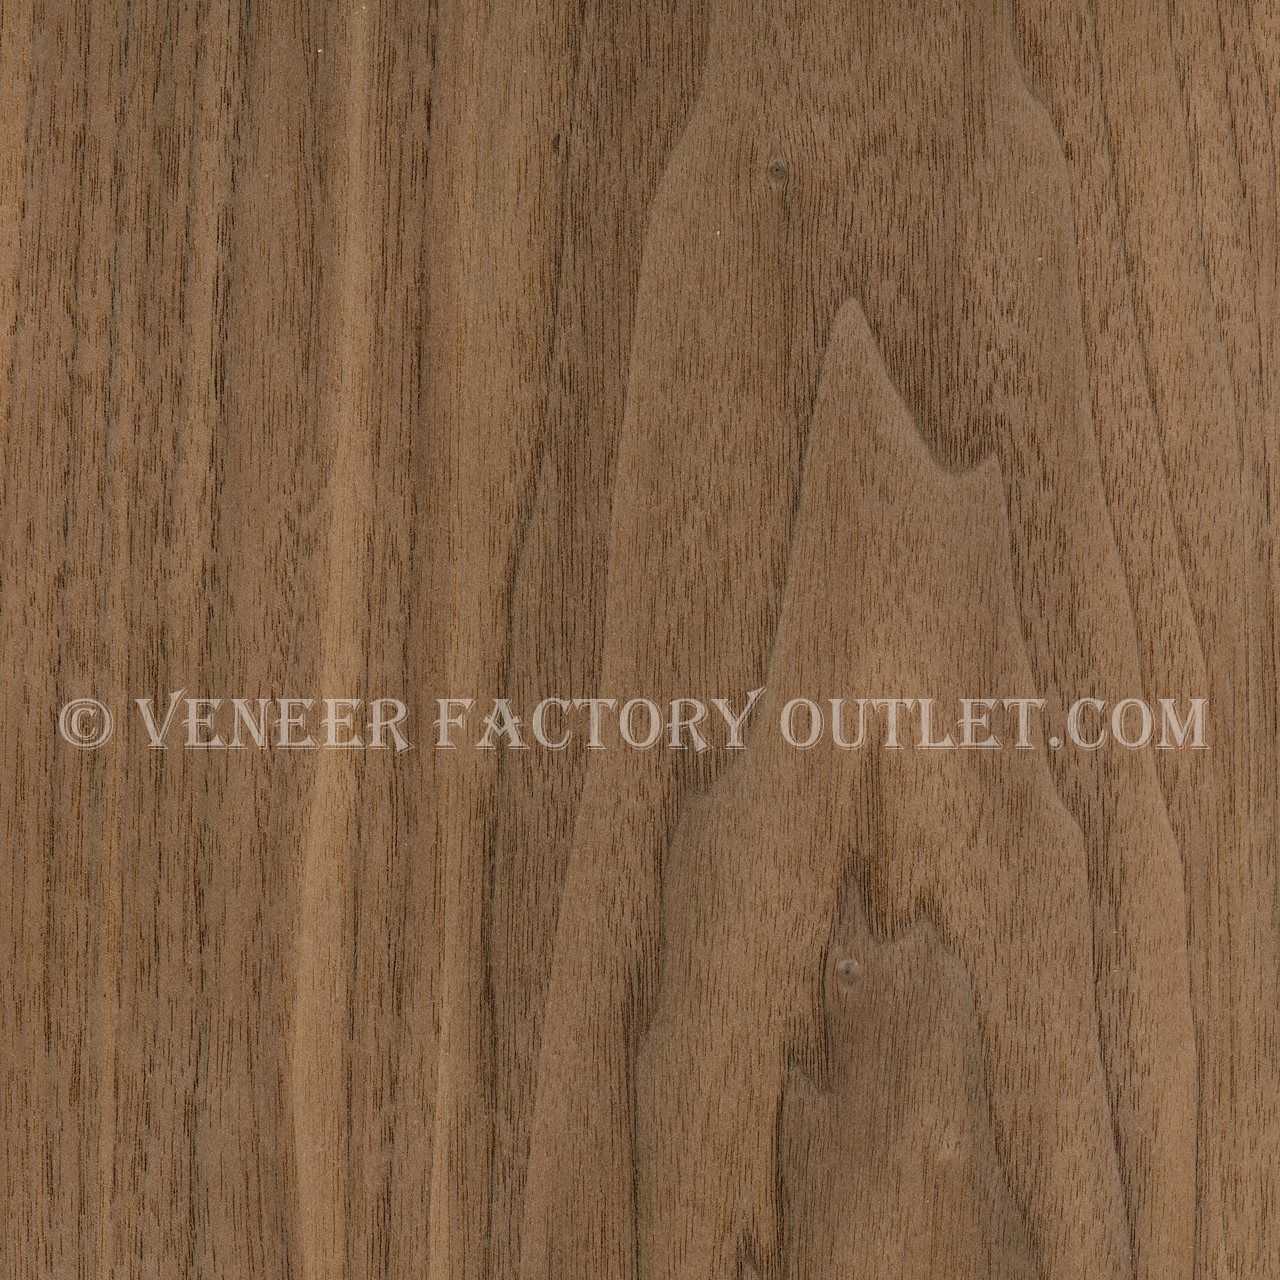 Walnut Raw Wood Veneer Sheet 8 x 28 inches 1/42nd or .6mm thick